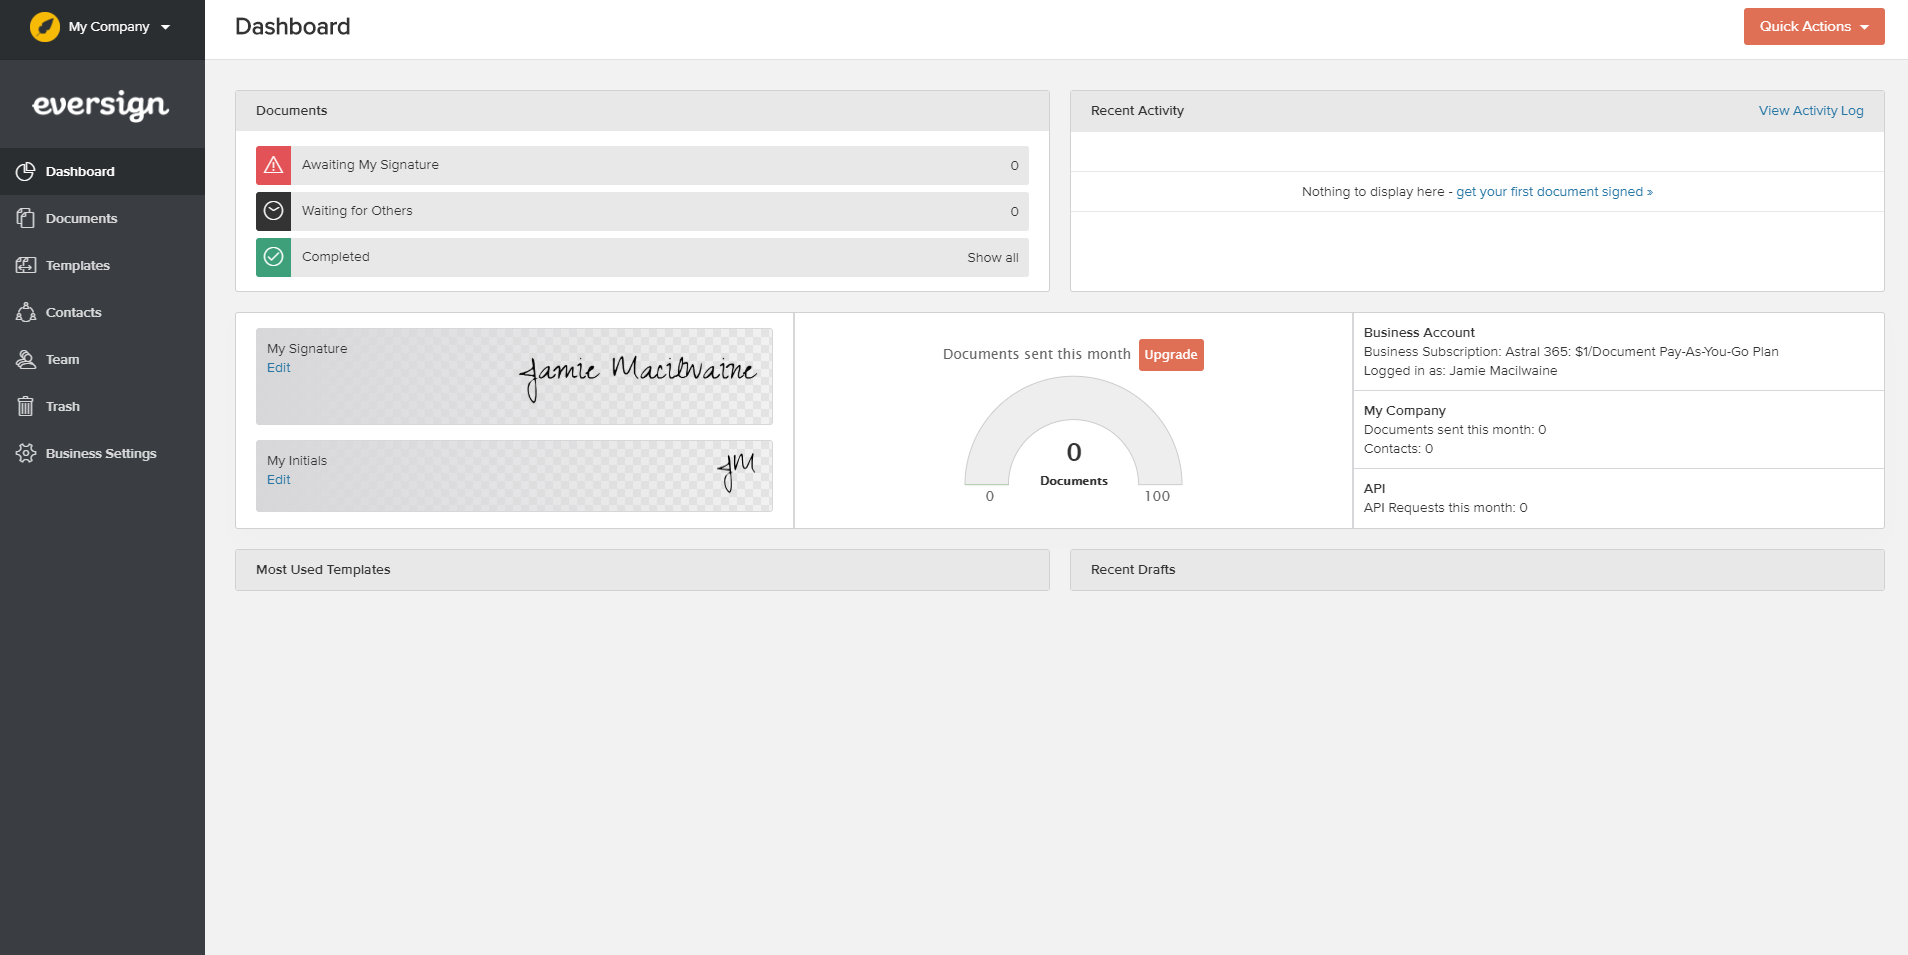 eversign Subscription Dashboard.img